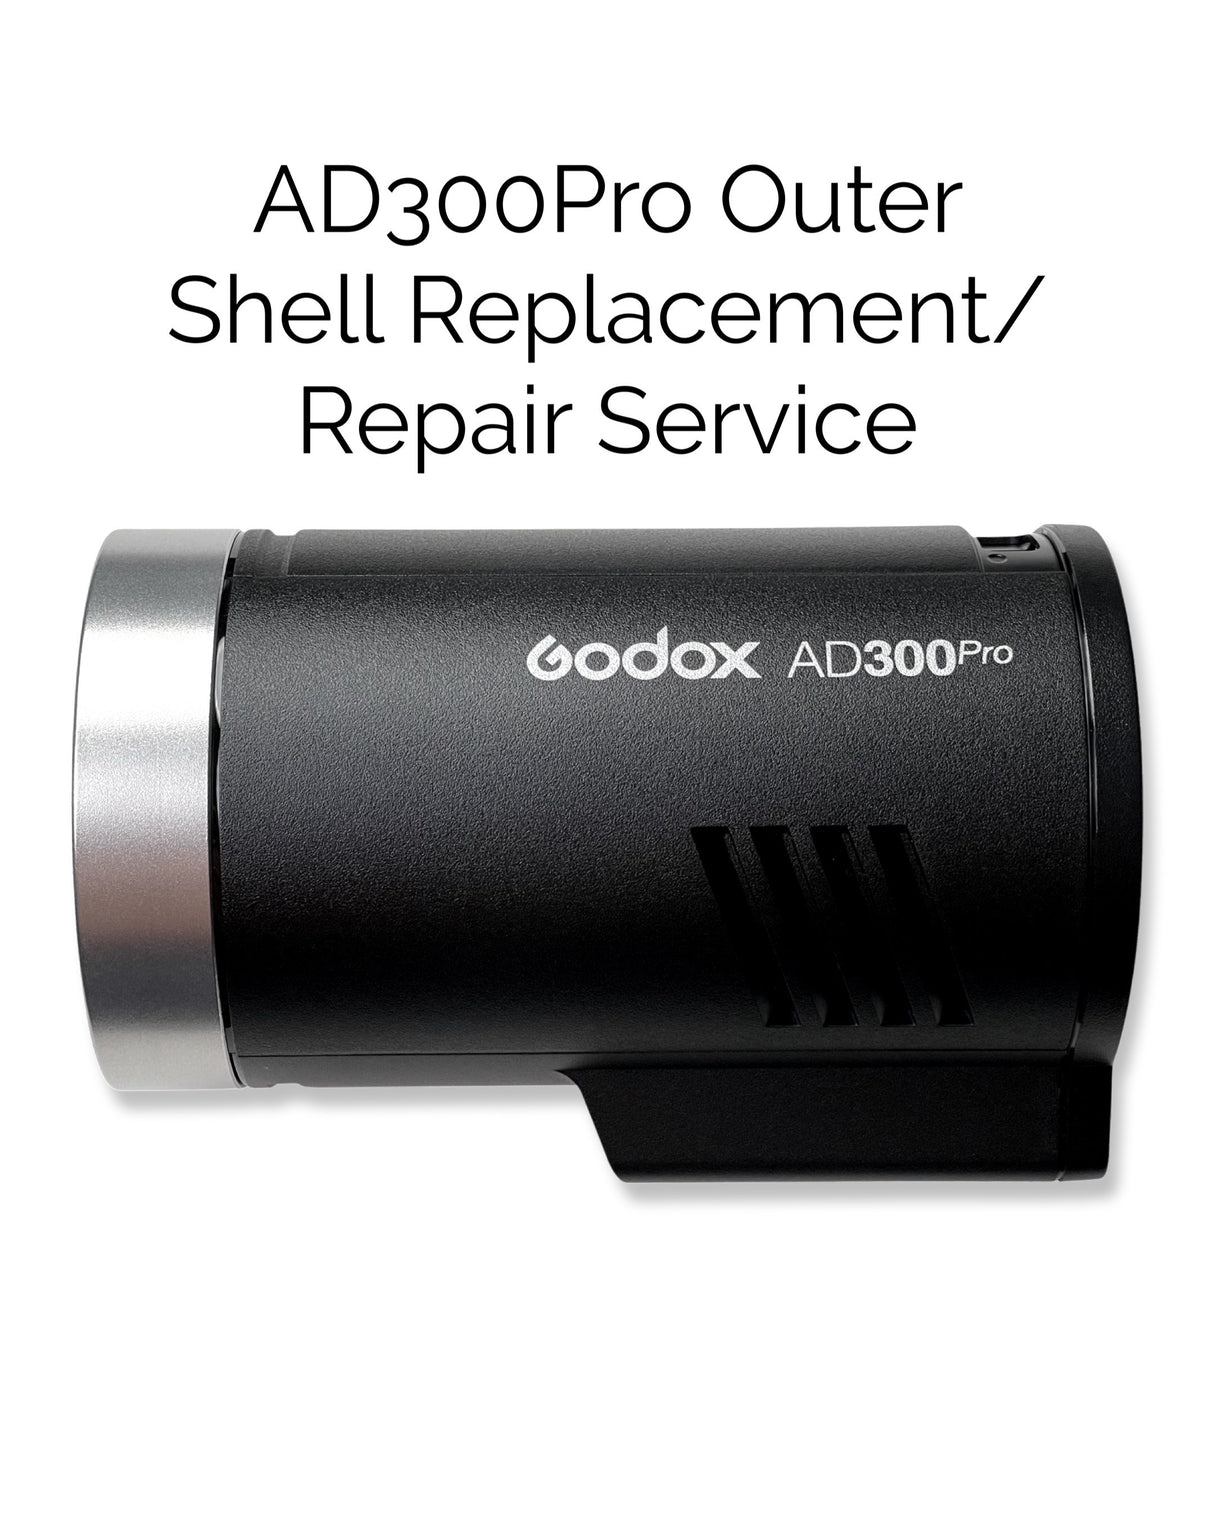 AD300Pro Outer Shell Replacement/Repair Service